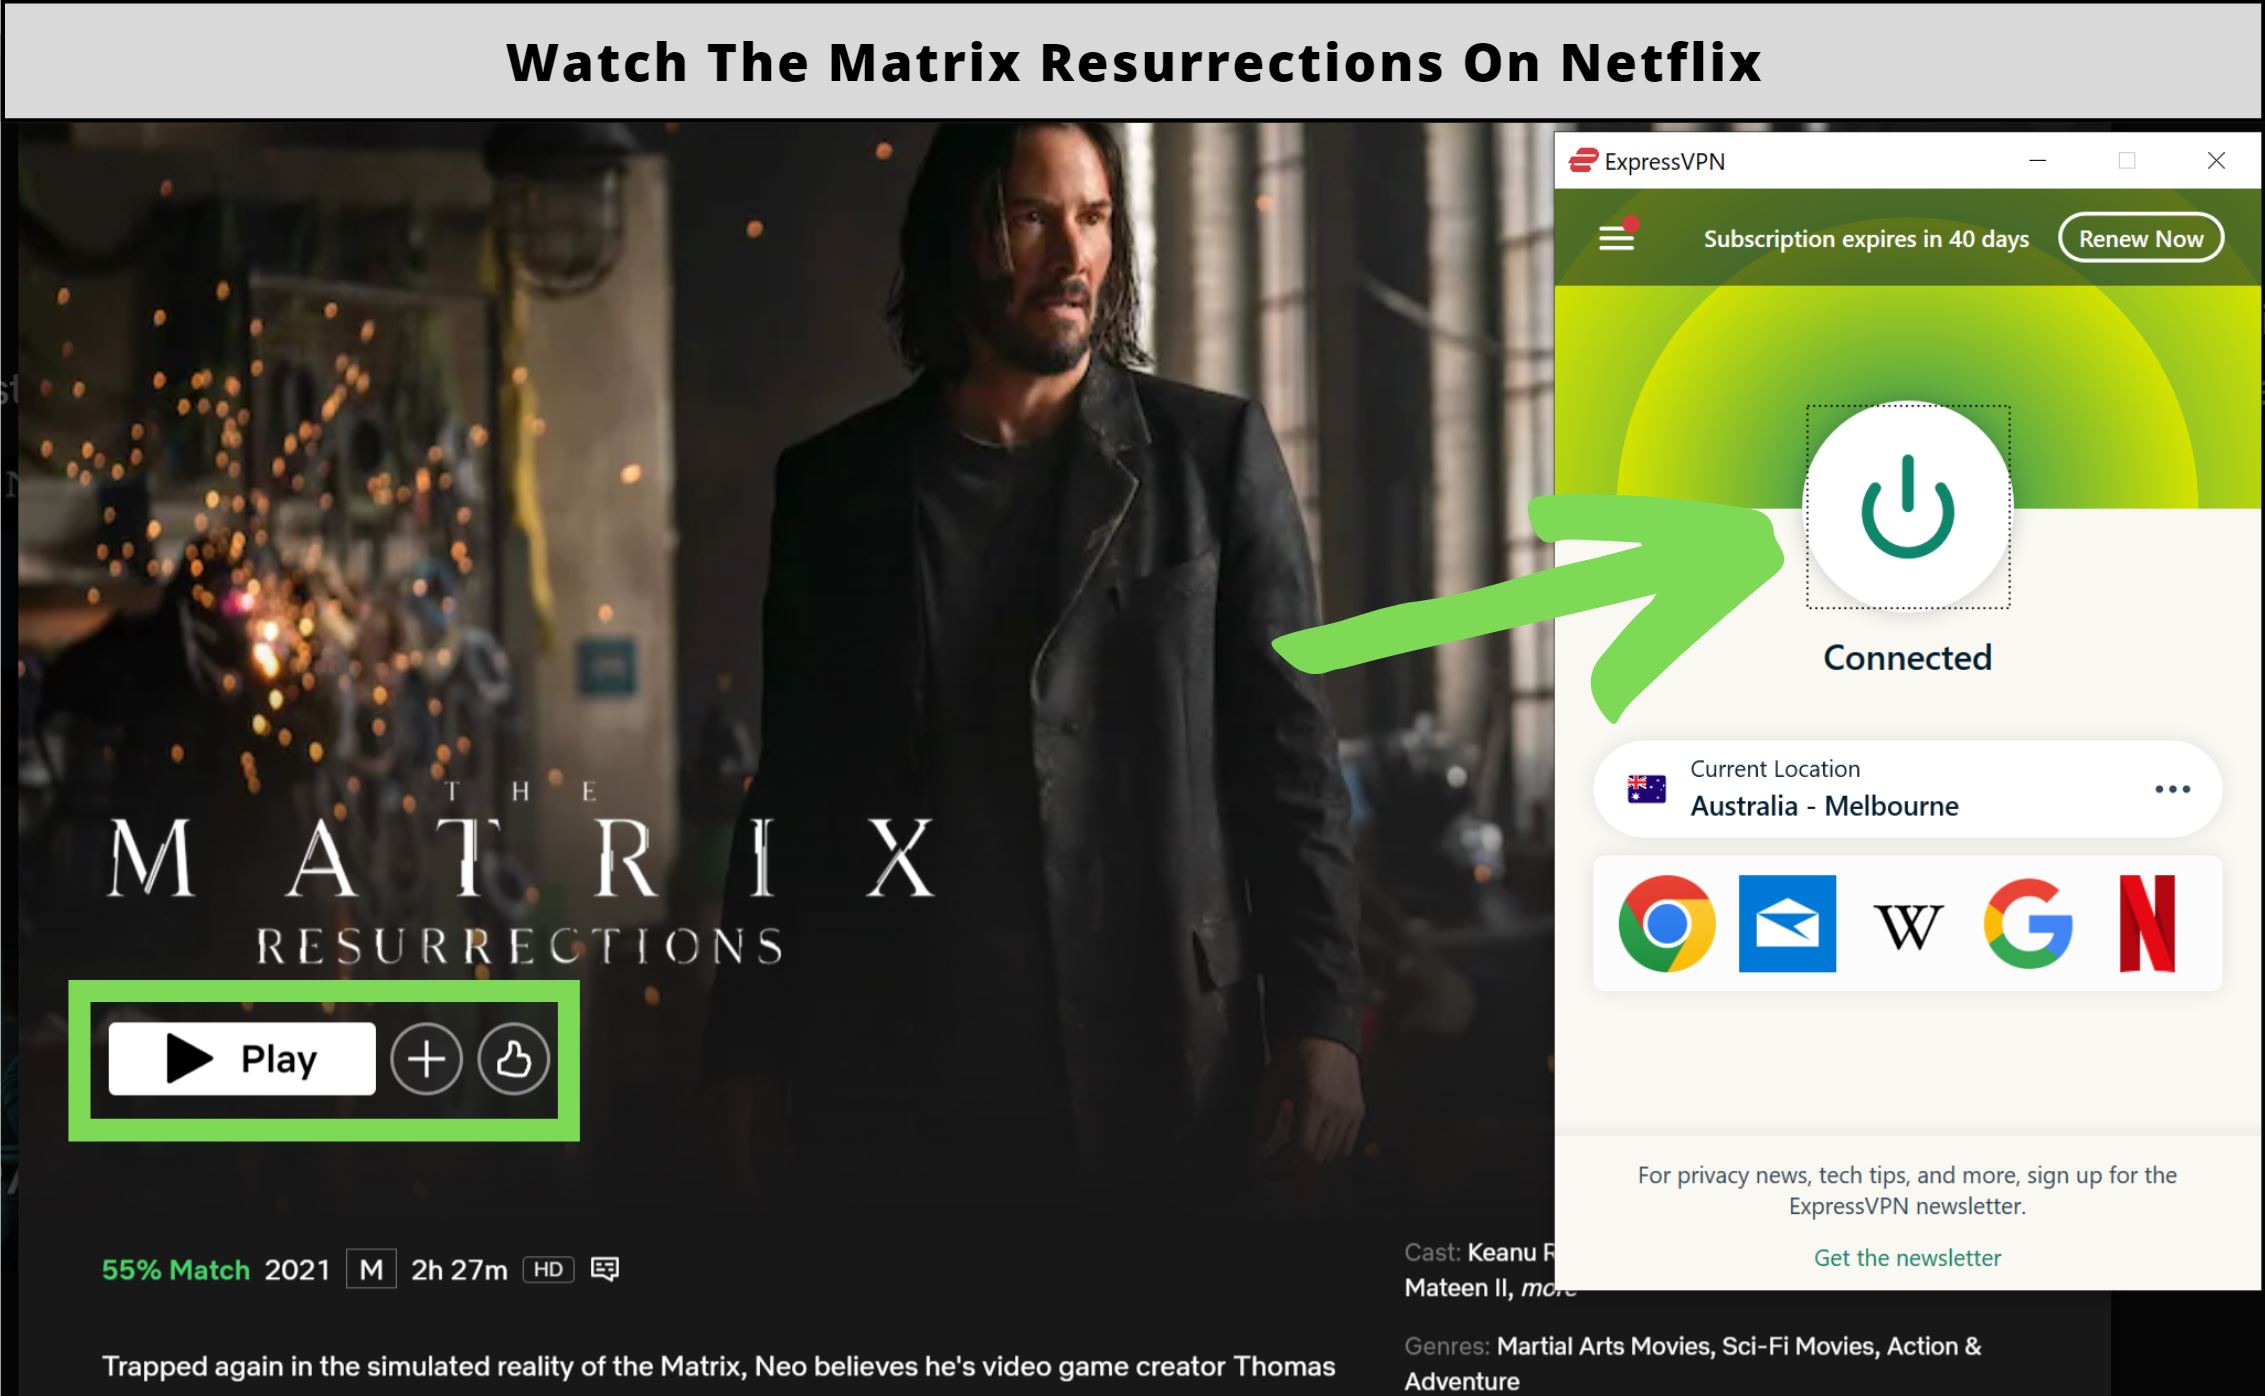 Is The Matrix Resurrection On Netflix| (Yes) How To Watch?